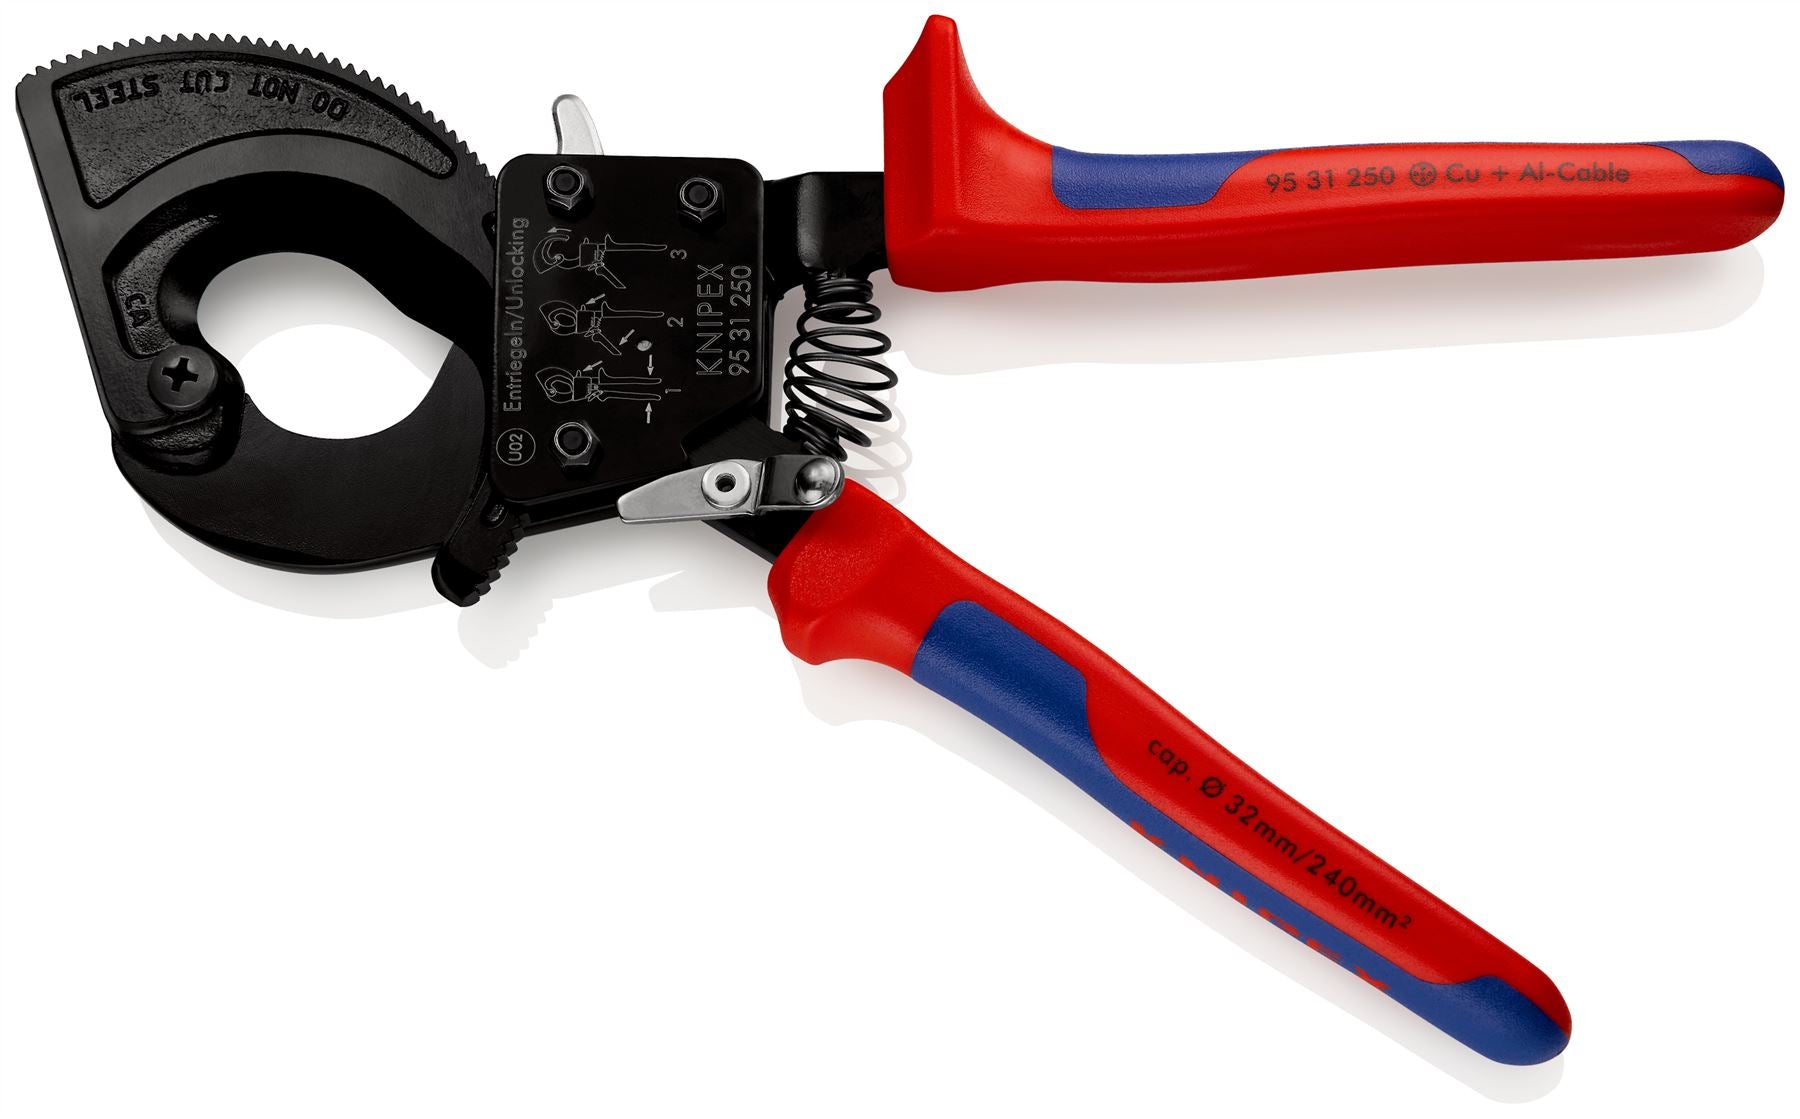 KNIPEX Cable Cutter Ratchet Action 32mm Diameter Cutting Capacity 250mm Multi Component Grips 95 31 250